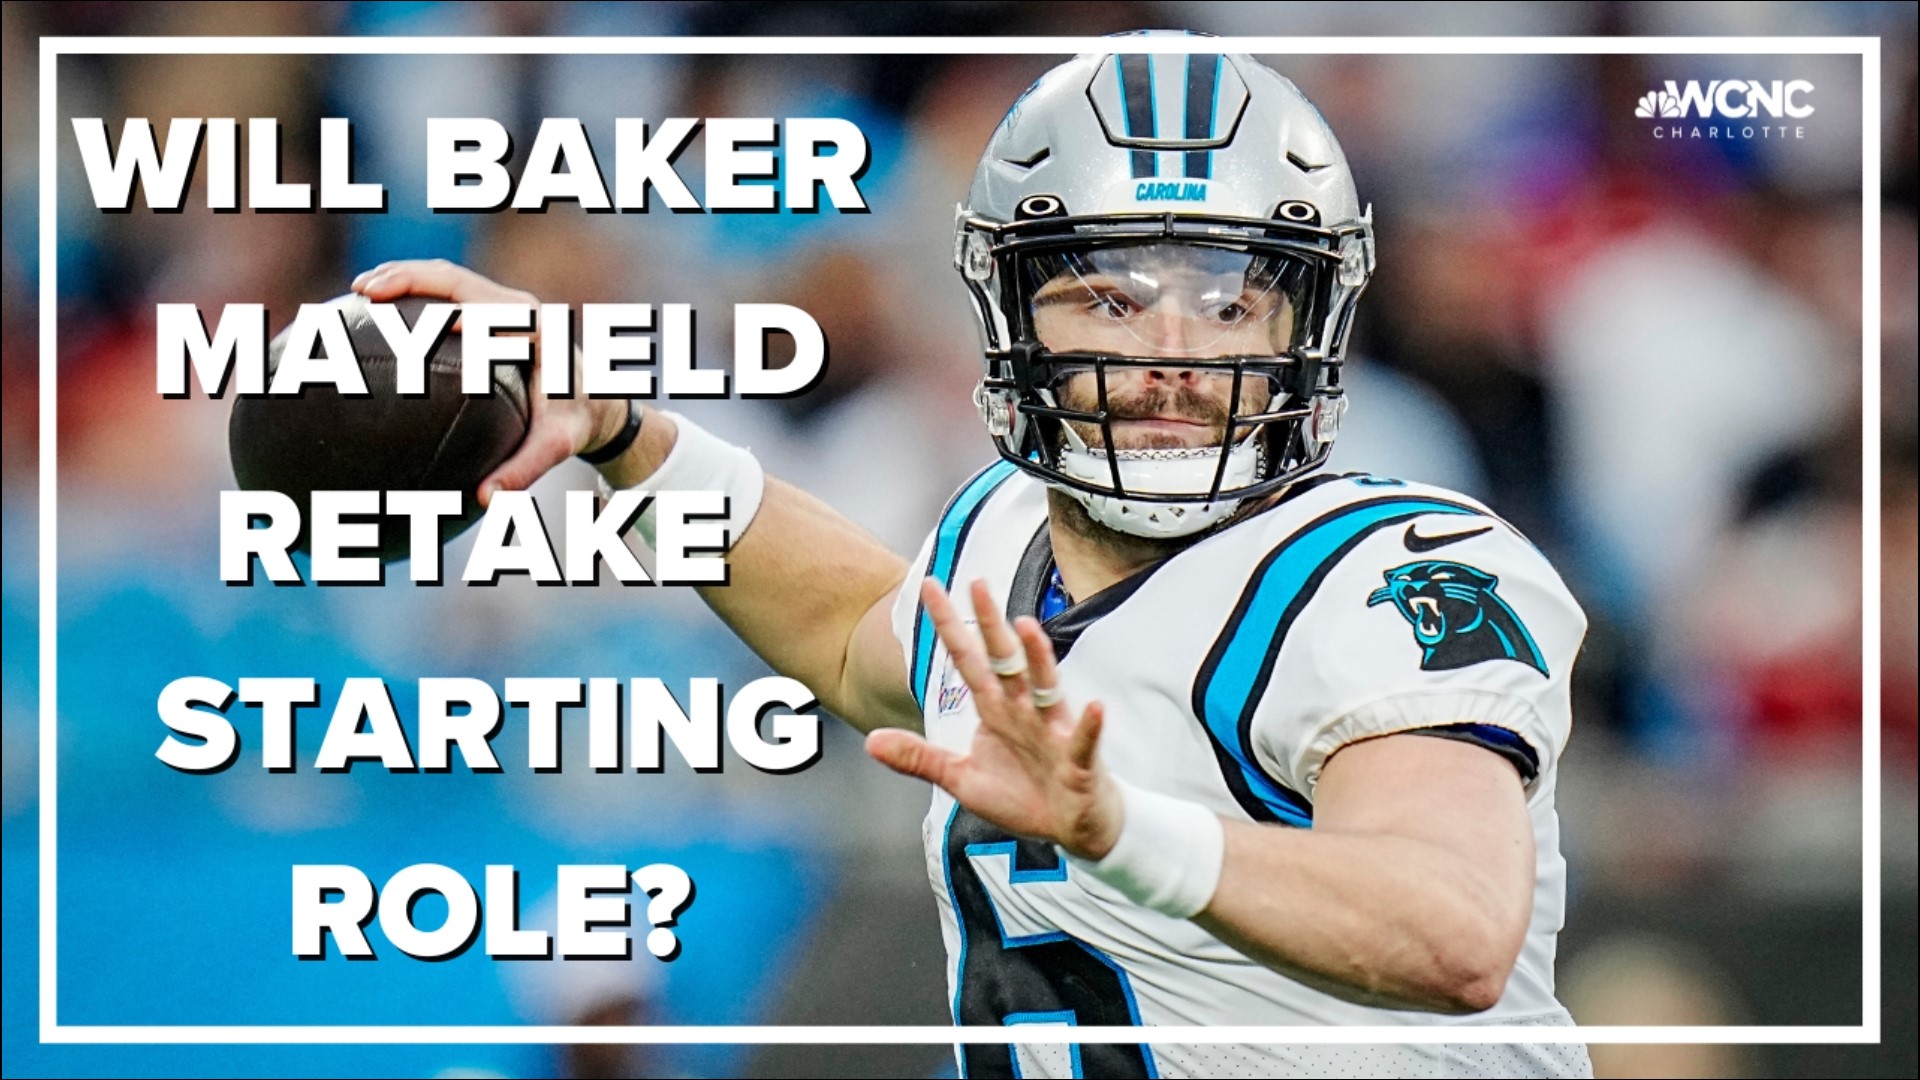 Locked On Panthers host Julian Council discussed the Carolina Panthers 42-21 loss to the Cincinnati Bengals and whether or not Baker Mayfield will start on Thursday